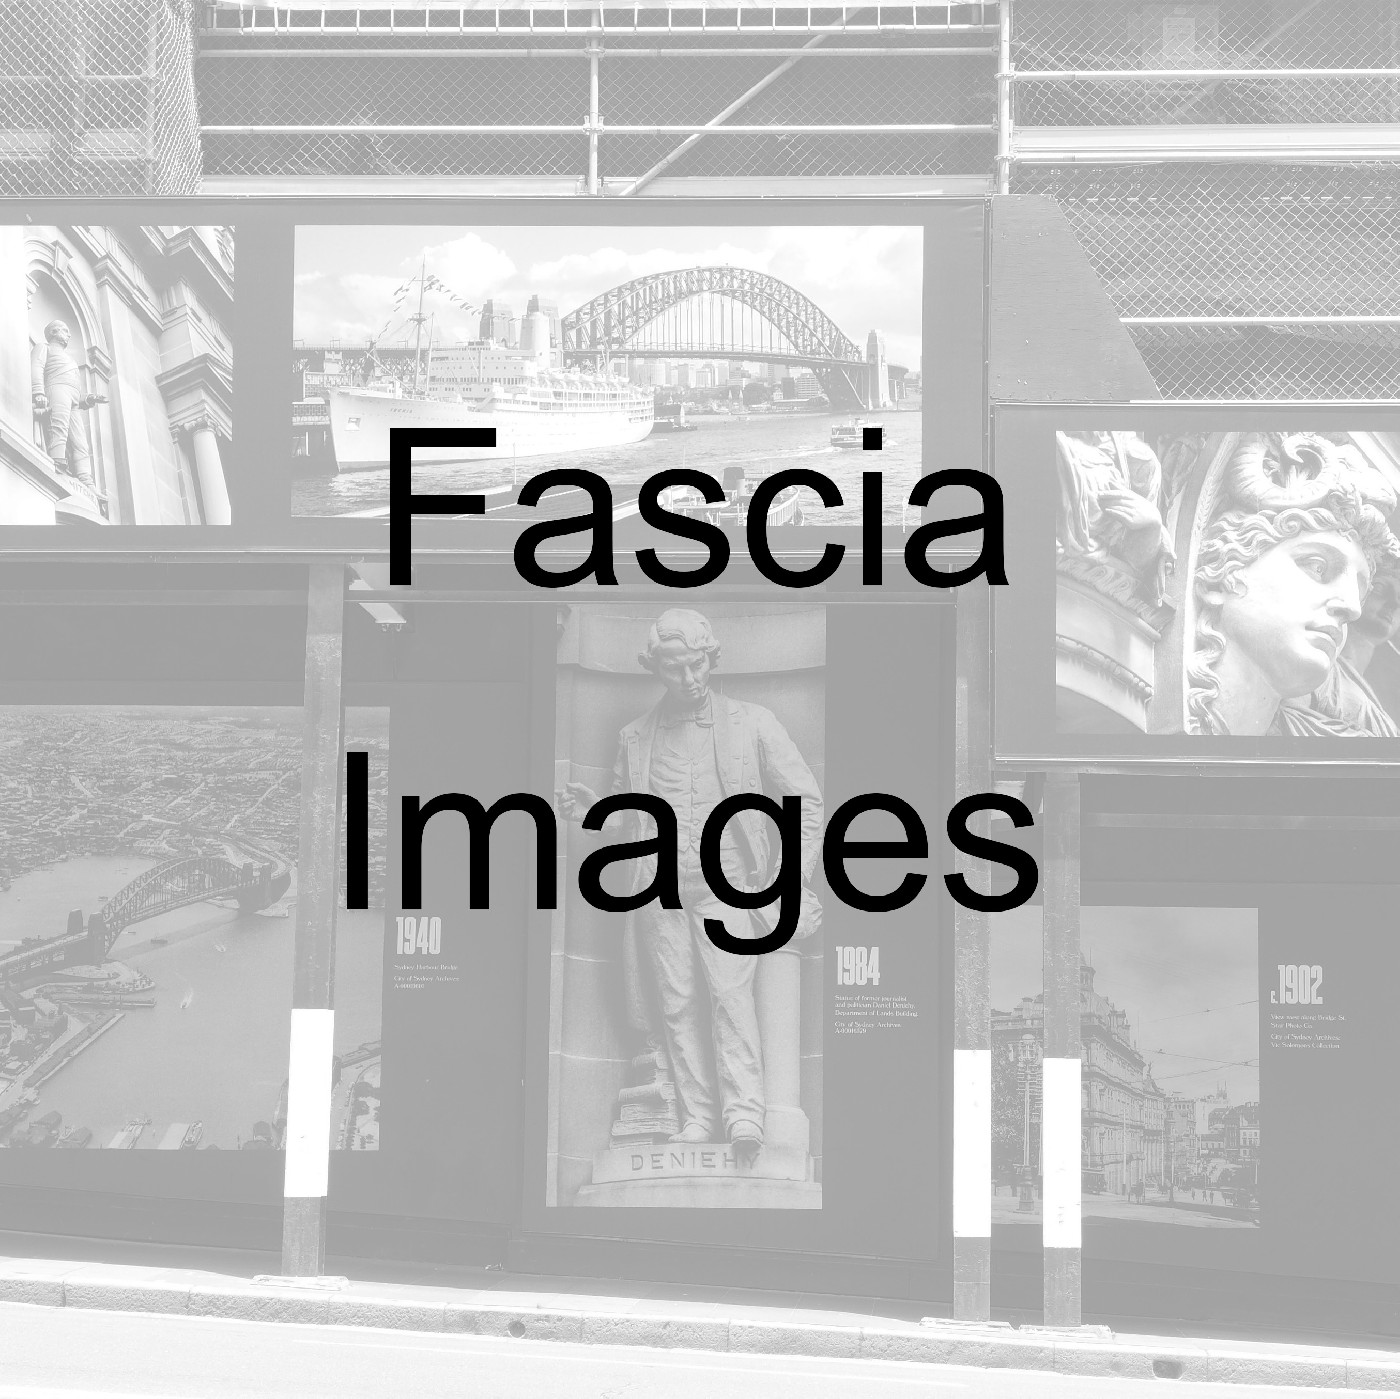 Town Hall - Fascia Images